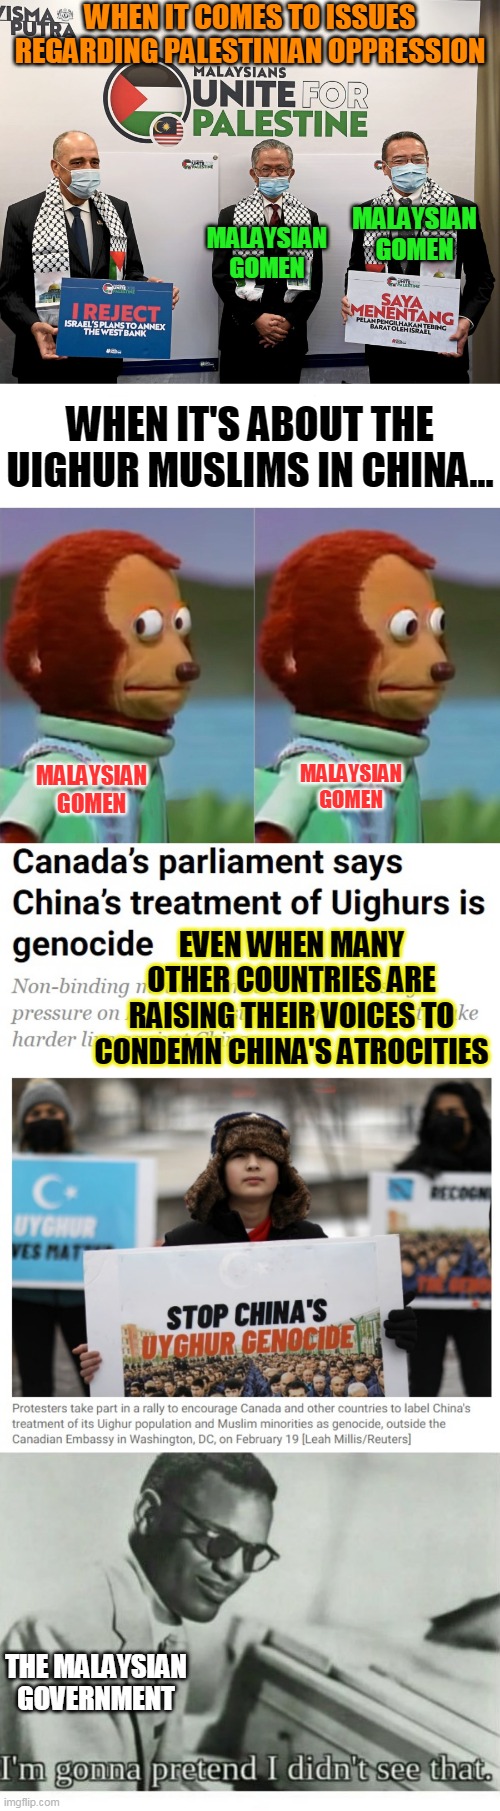 My Malaysian Government Everyone | WHEN IT COMES TO ISSUES REGARDING PALESTINIAN OPPRESSION; MALAYSIAN GOMEN; MALAYSIAN GOMEN; WHEN IT'S ABOUT THE UIGHUR MUSLIMS IN CHINA... MALAYSIAN GOMEN; MALAYSIAN GOMEN; EVEN WHEN MANY OTHER COUNTRIES ARE RAISING THEIR VOICES TO CONDEMN CHINA'S ATROCITIES; THE MALAYSIAN GOVERNMENT | image tagged in i'm gonna pretend i didn't just see that,i'm gonna pretend i didn't see that | made w/ Imgflip meme maker